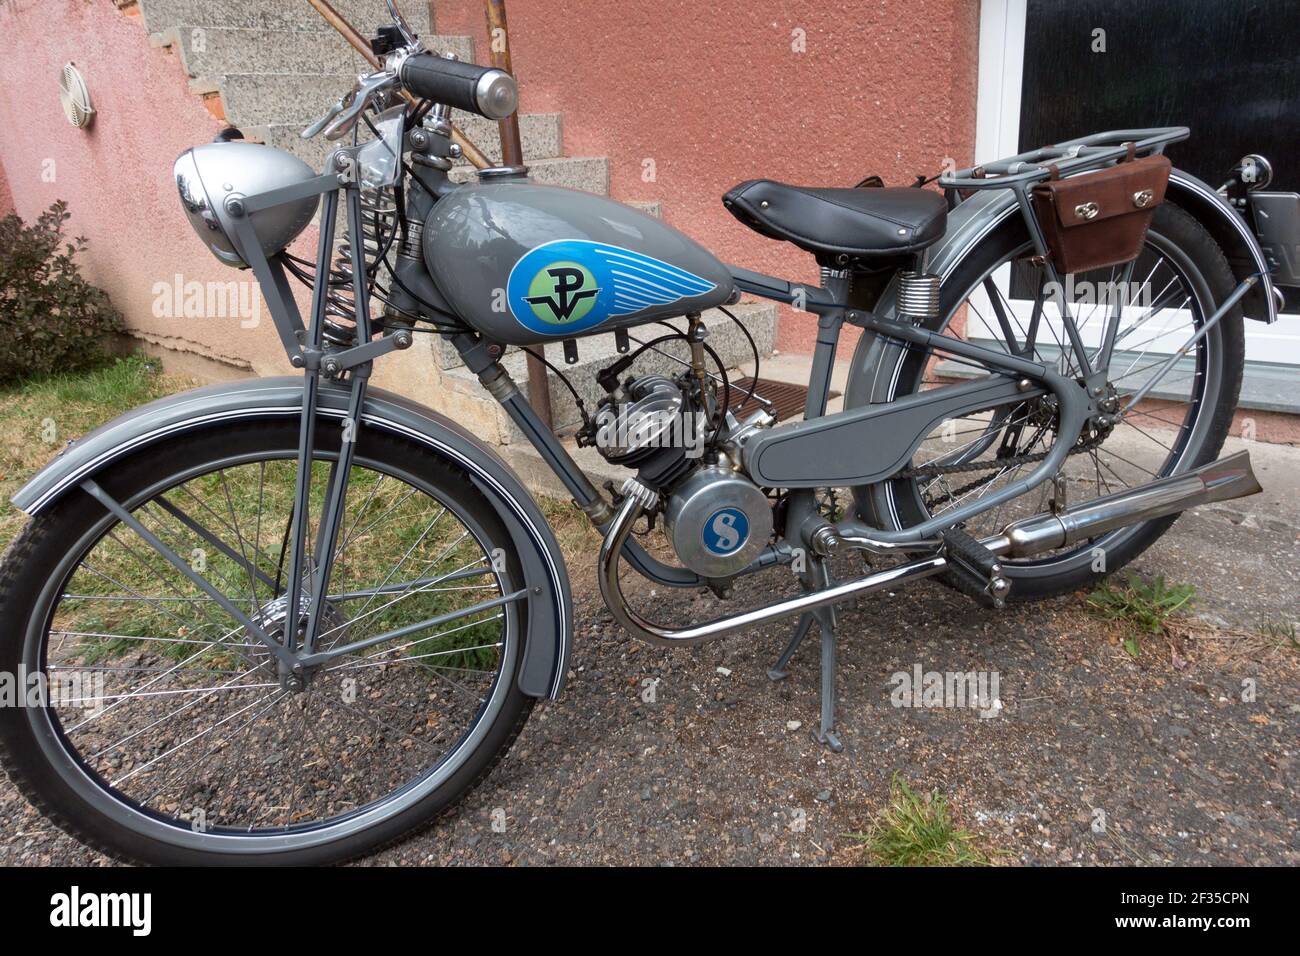 Sachs Wanderer 98, Old motorcycle 1939 Stock Photo